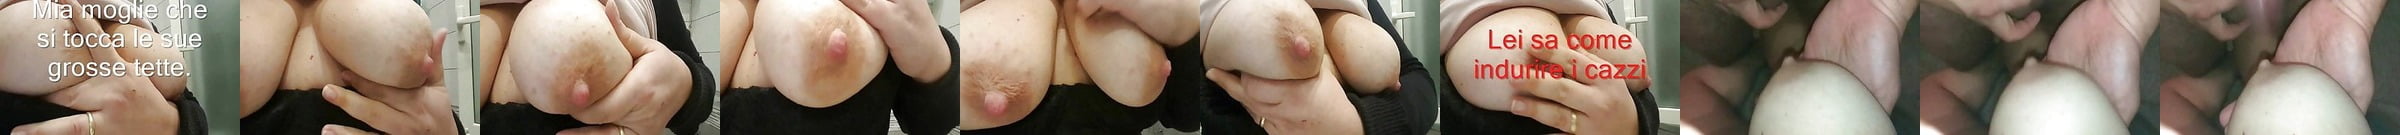 Featured Huge Tits Fucked Porn Videos 5 Xhamster